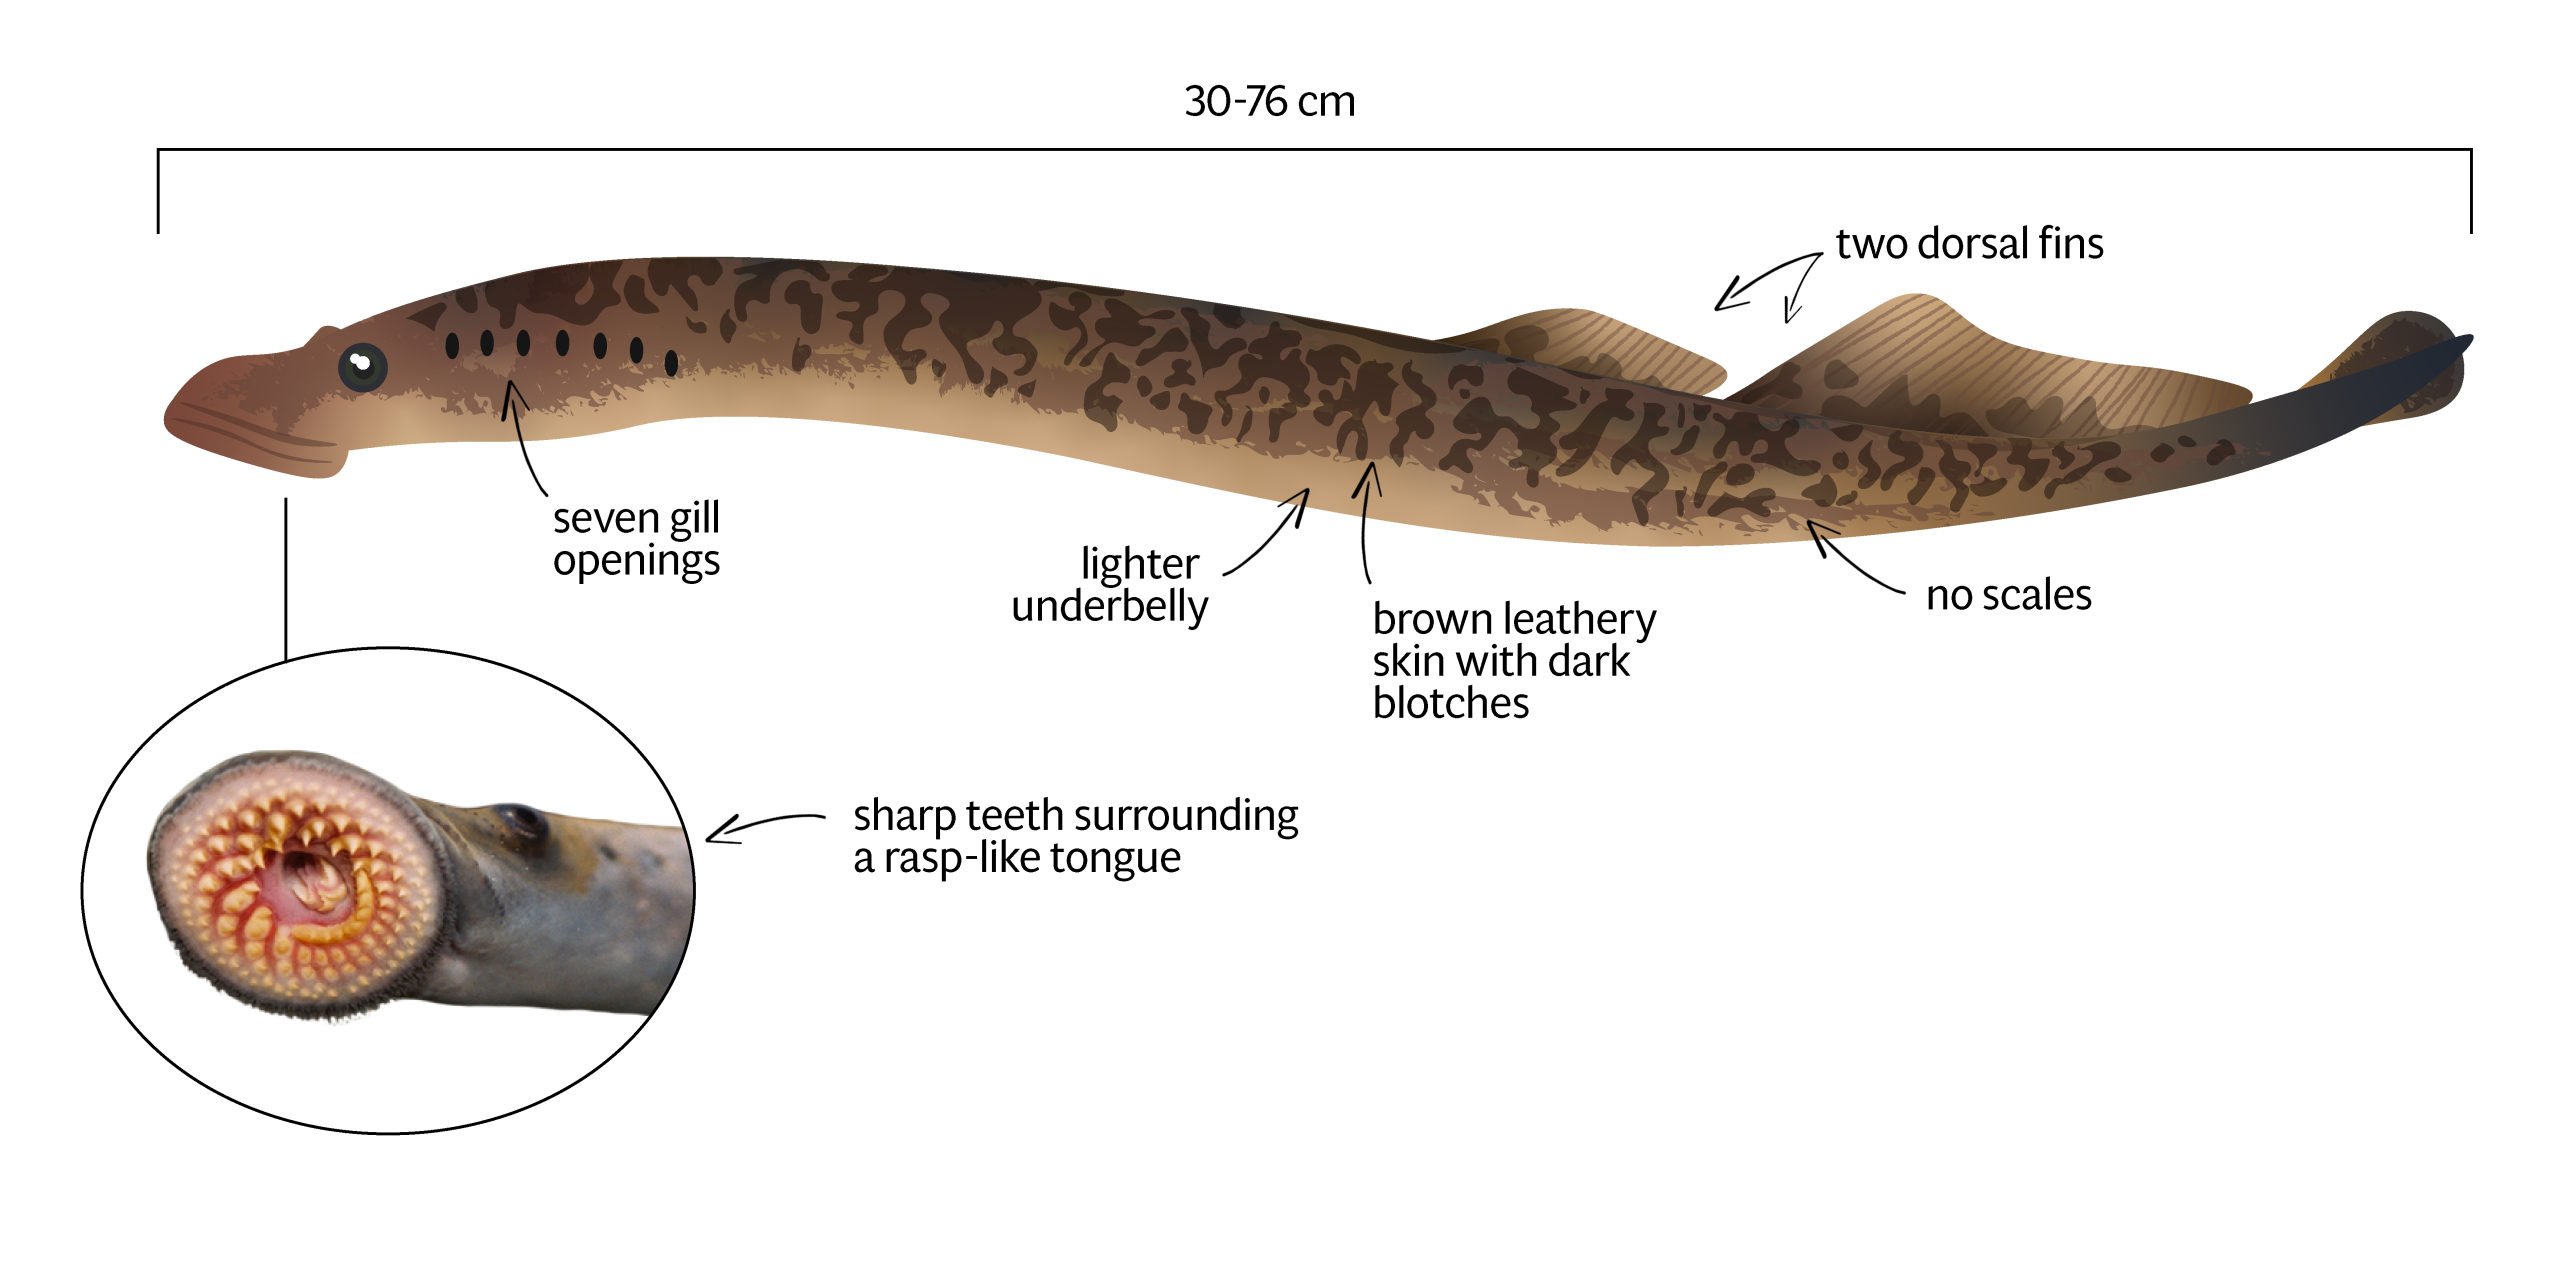 Sea Lamprey Profile And Resources, What Are Sea Lampreys